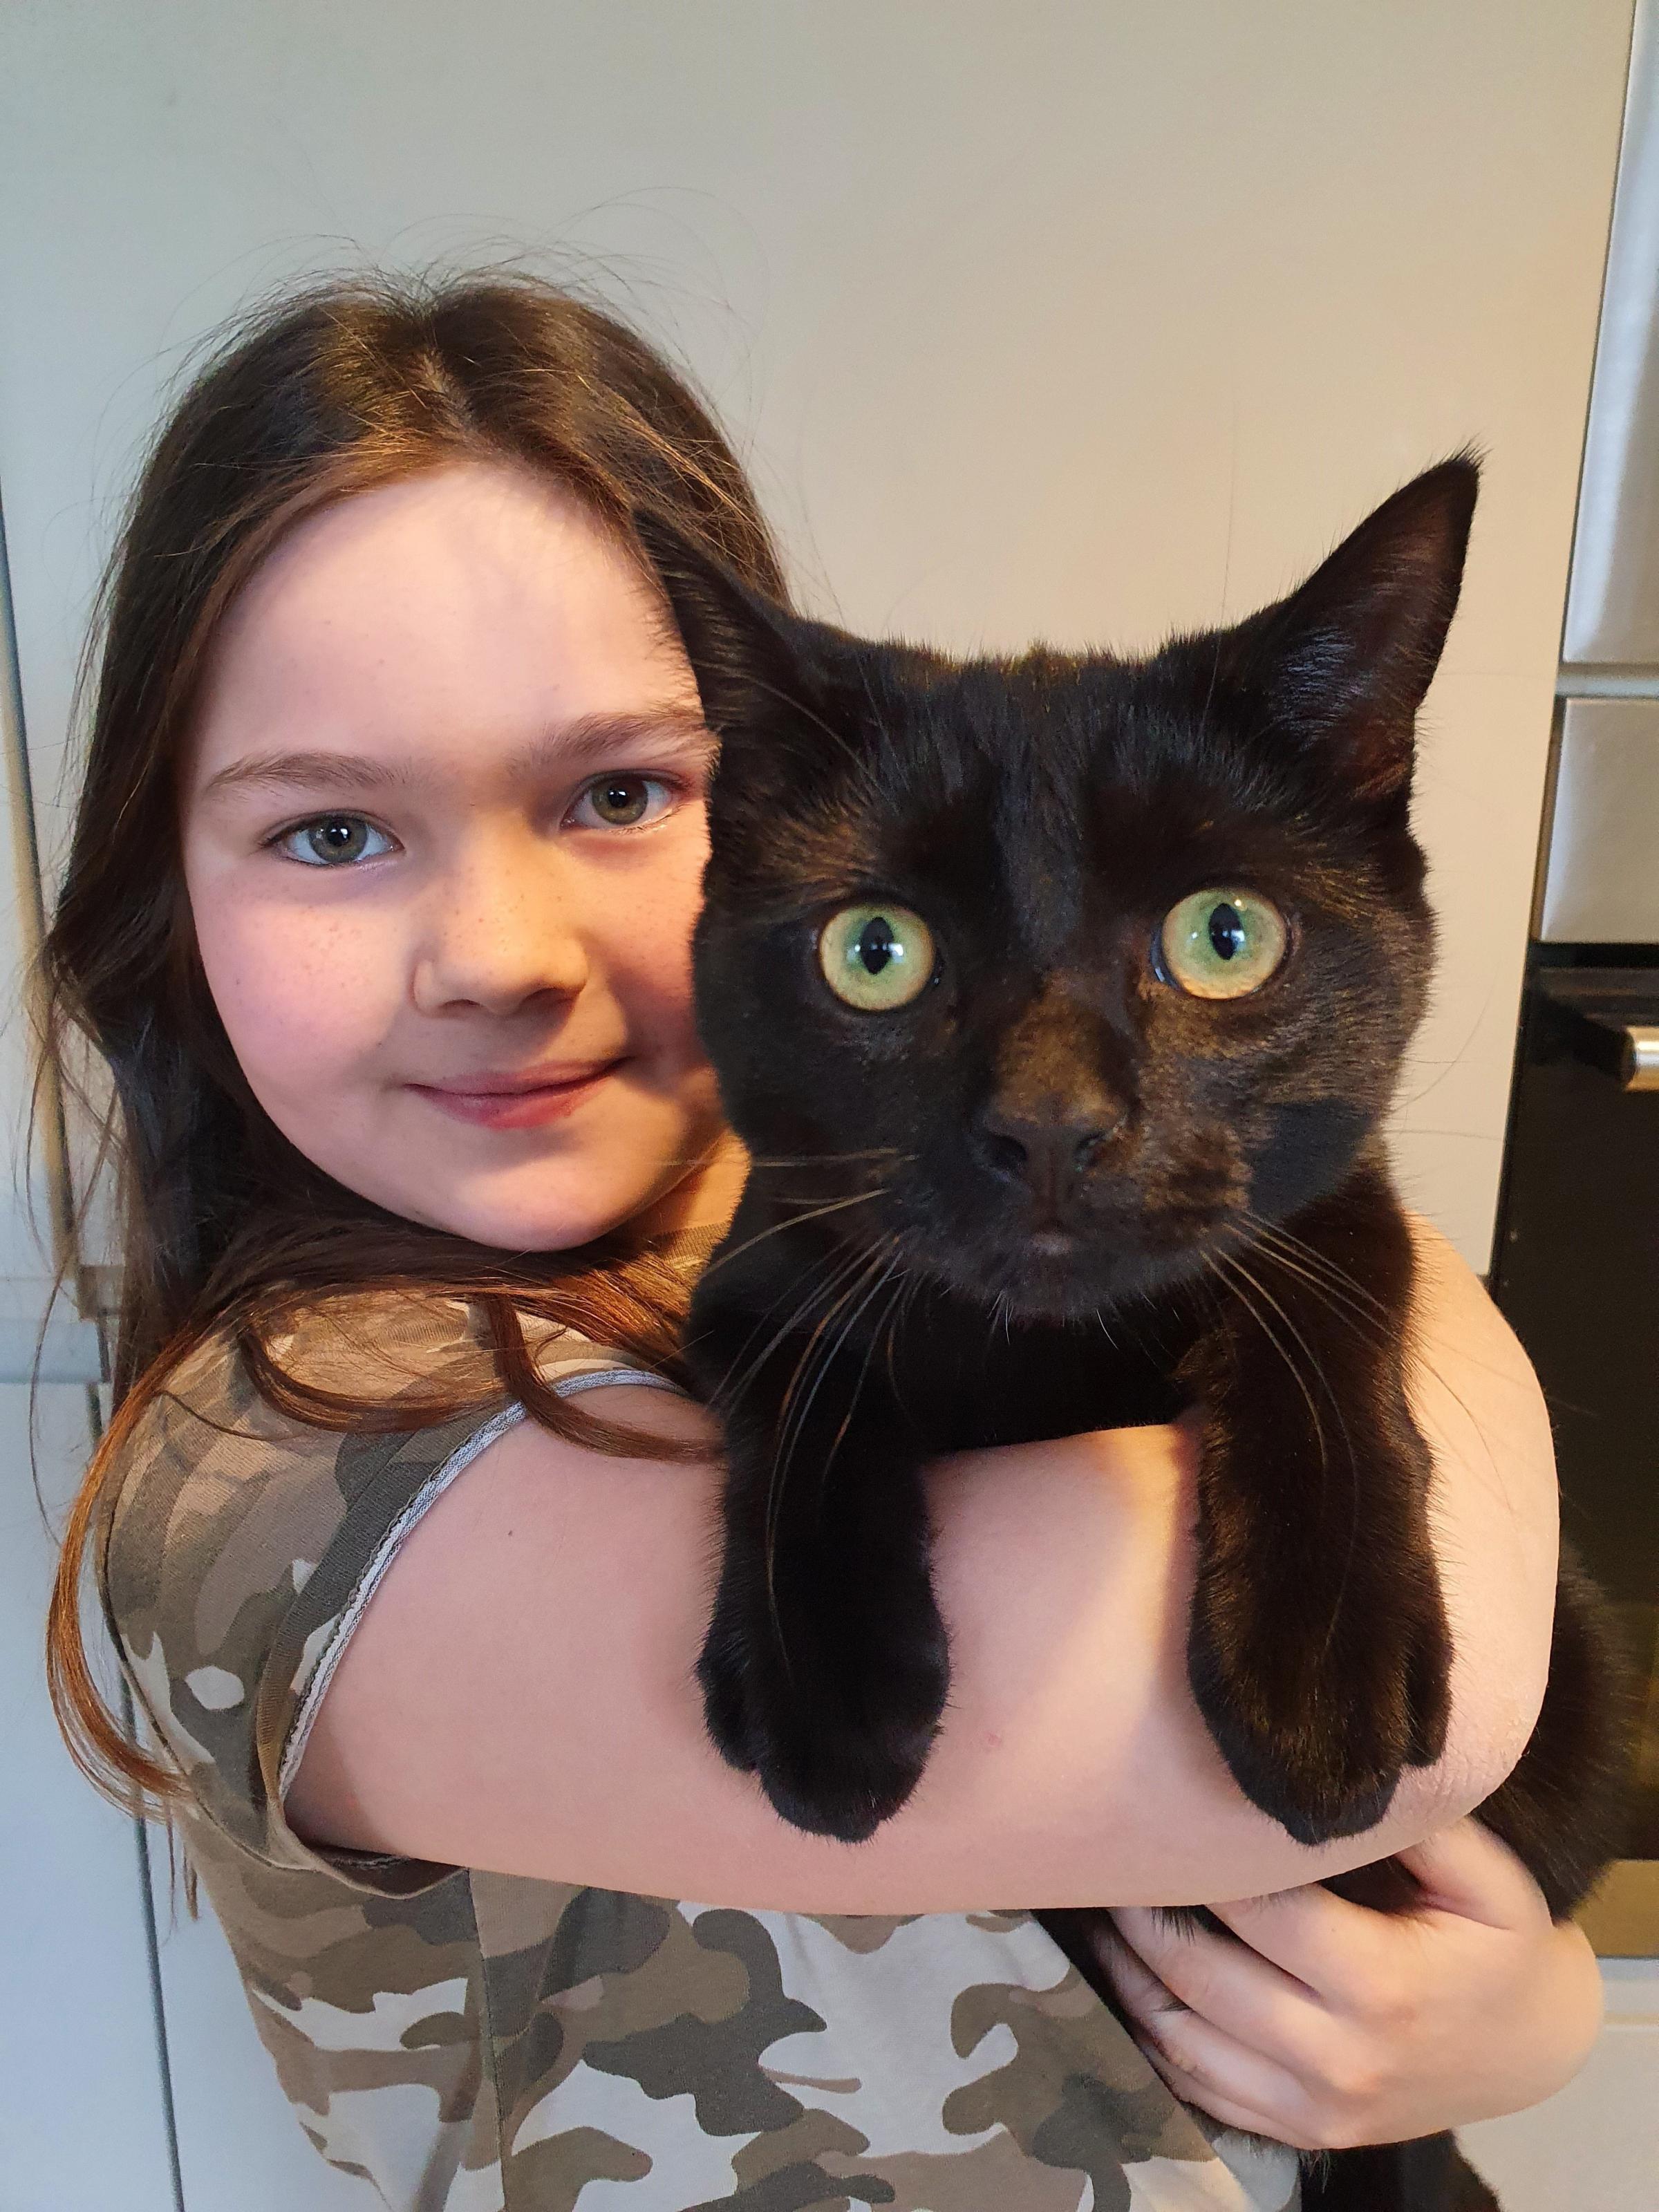 Daugher MIllie, 9, with Kai the cat